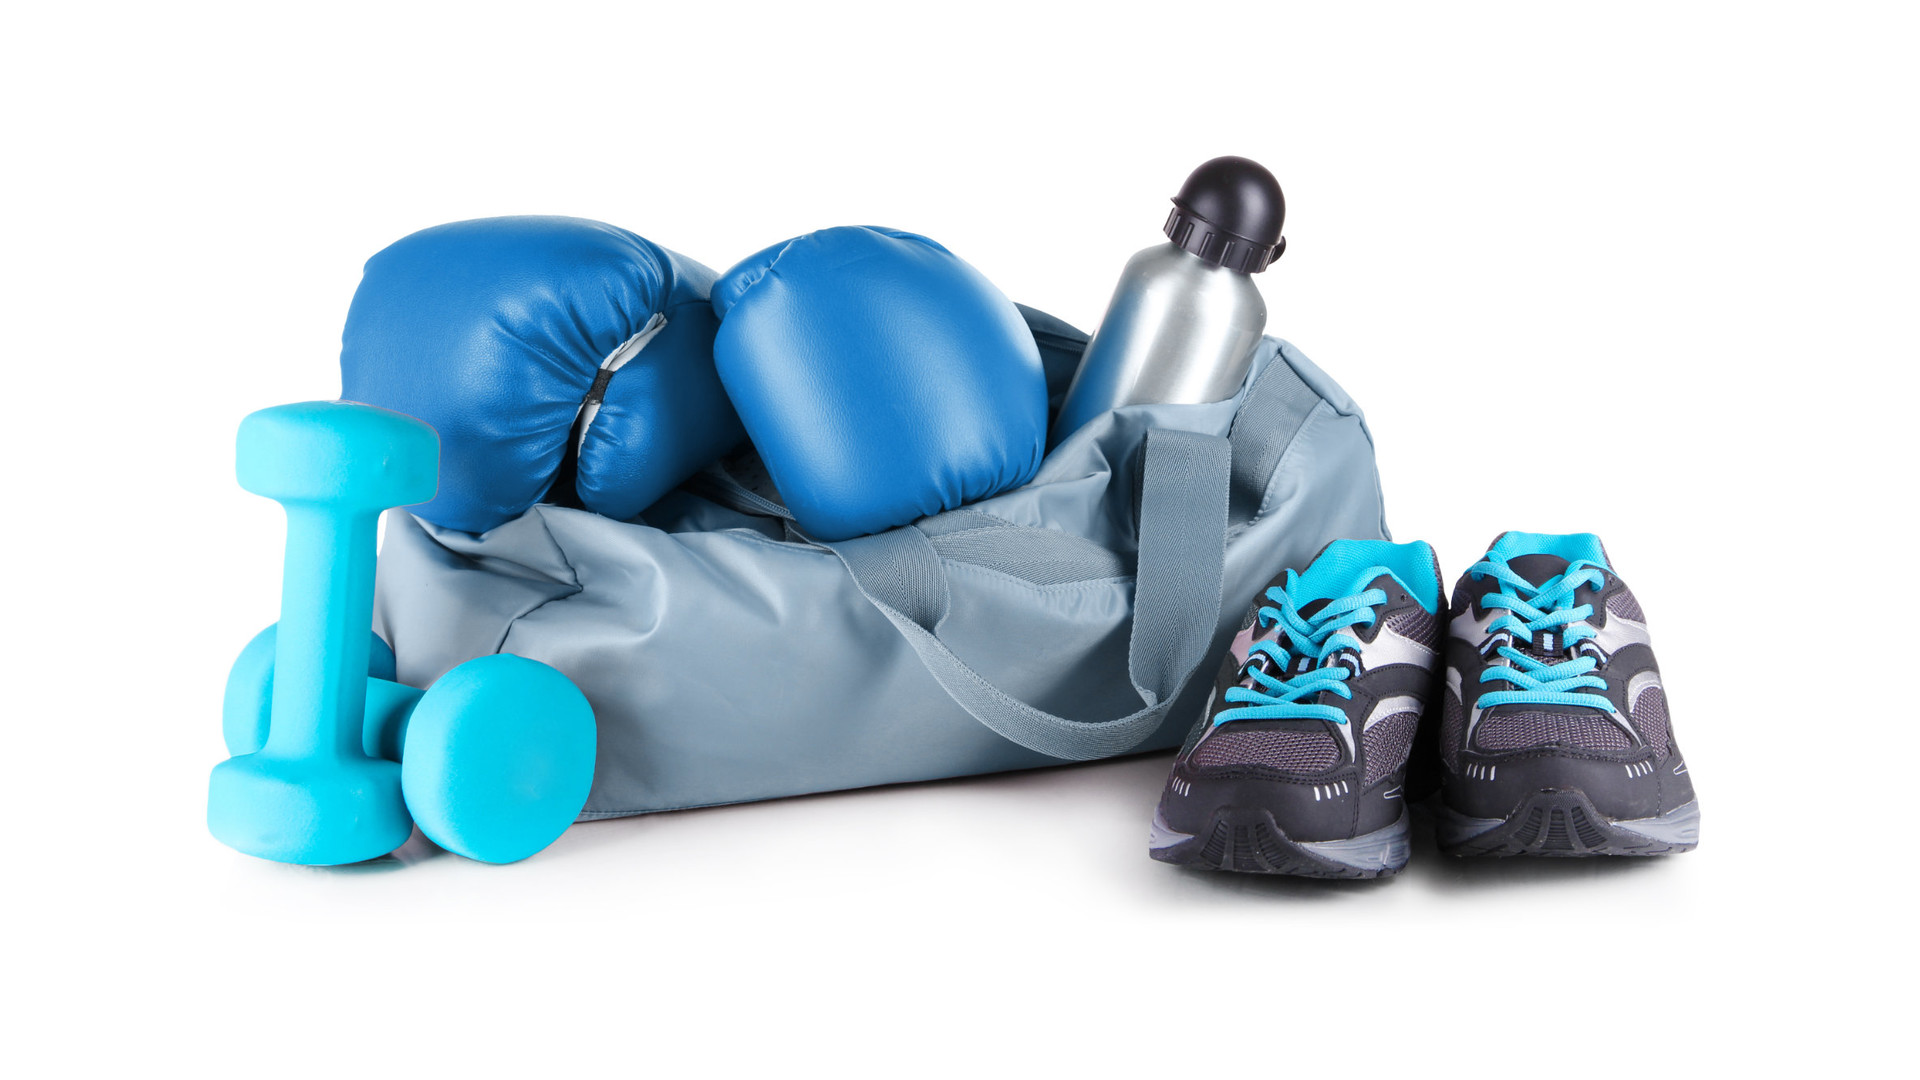 A gym bag surrounded by boxing gloves, dumbbells and sneakers